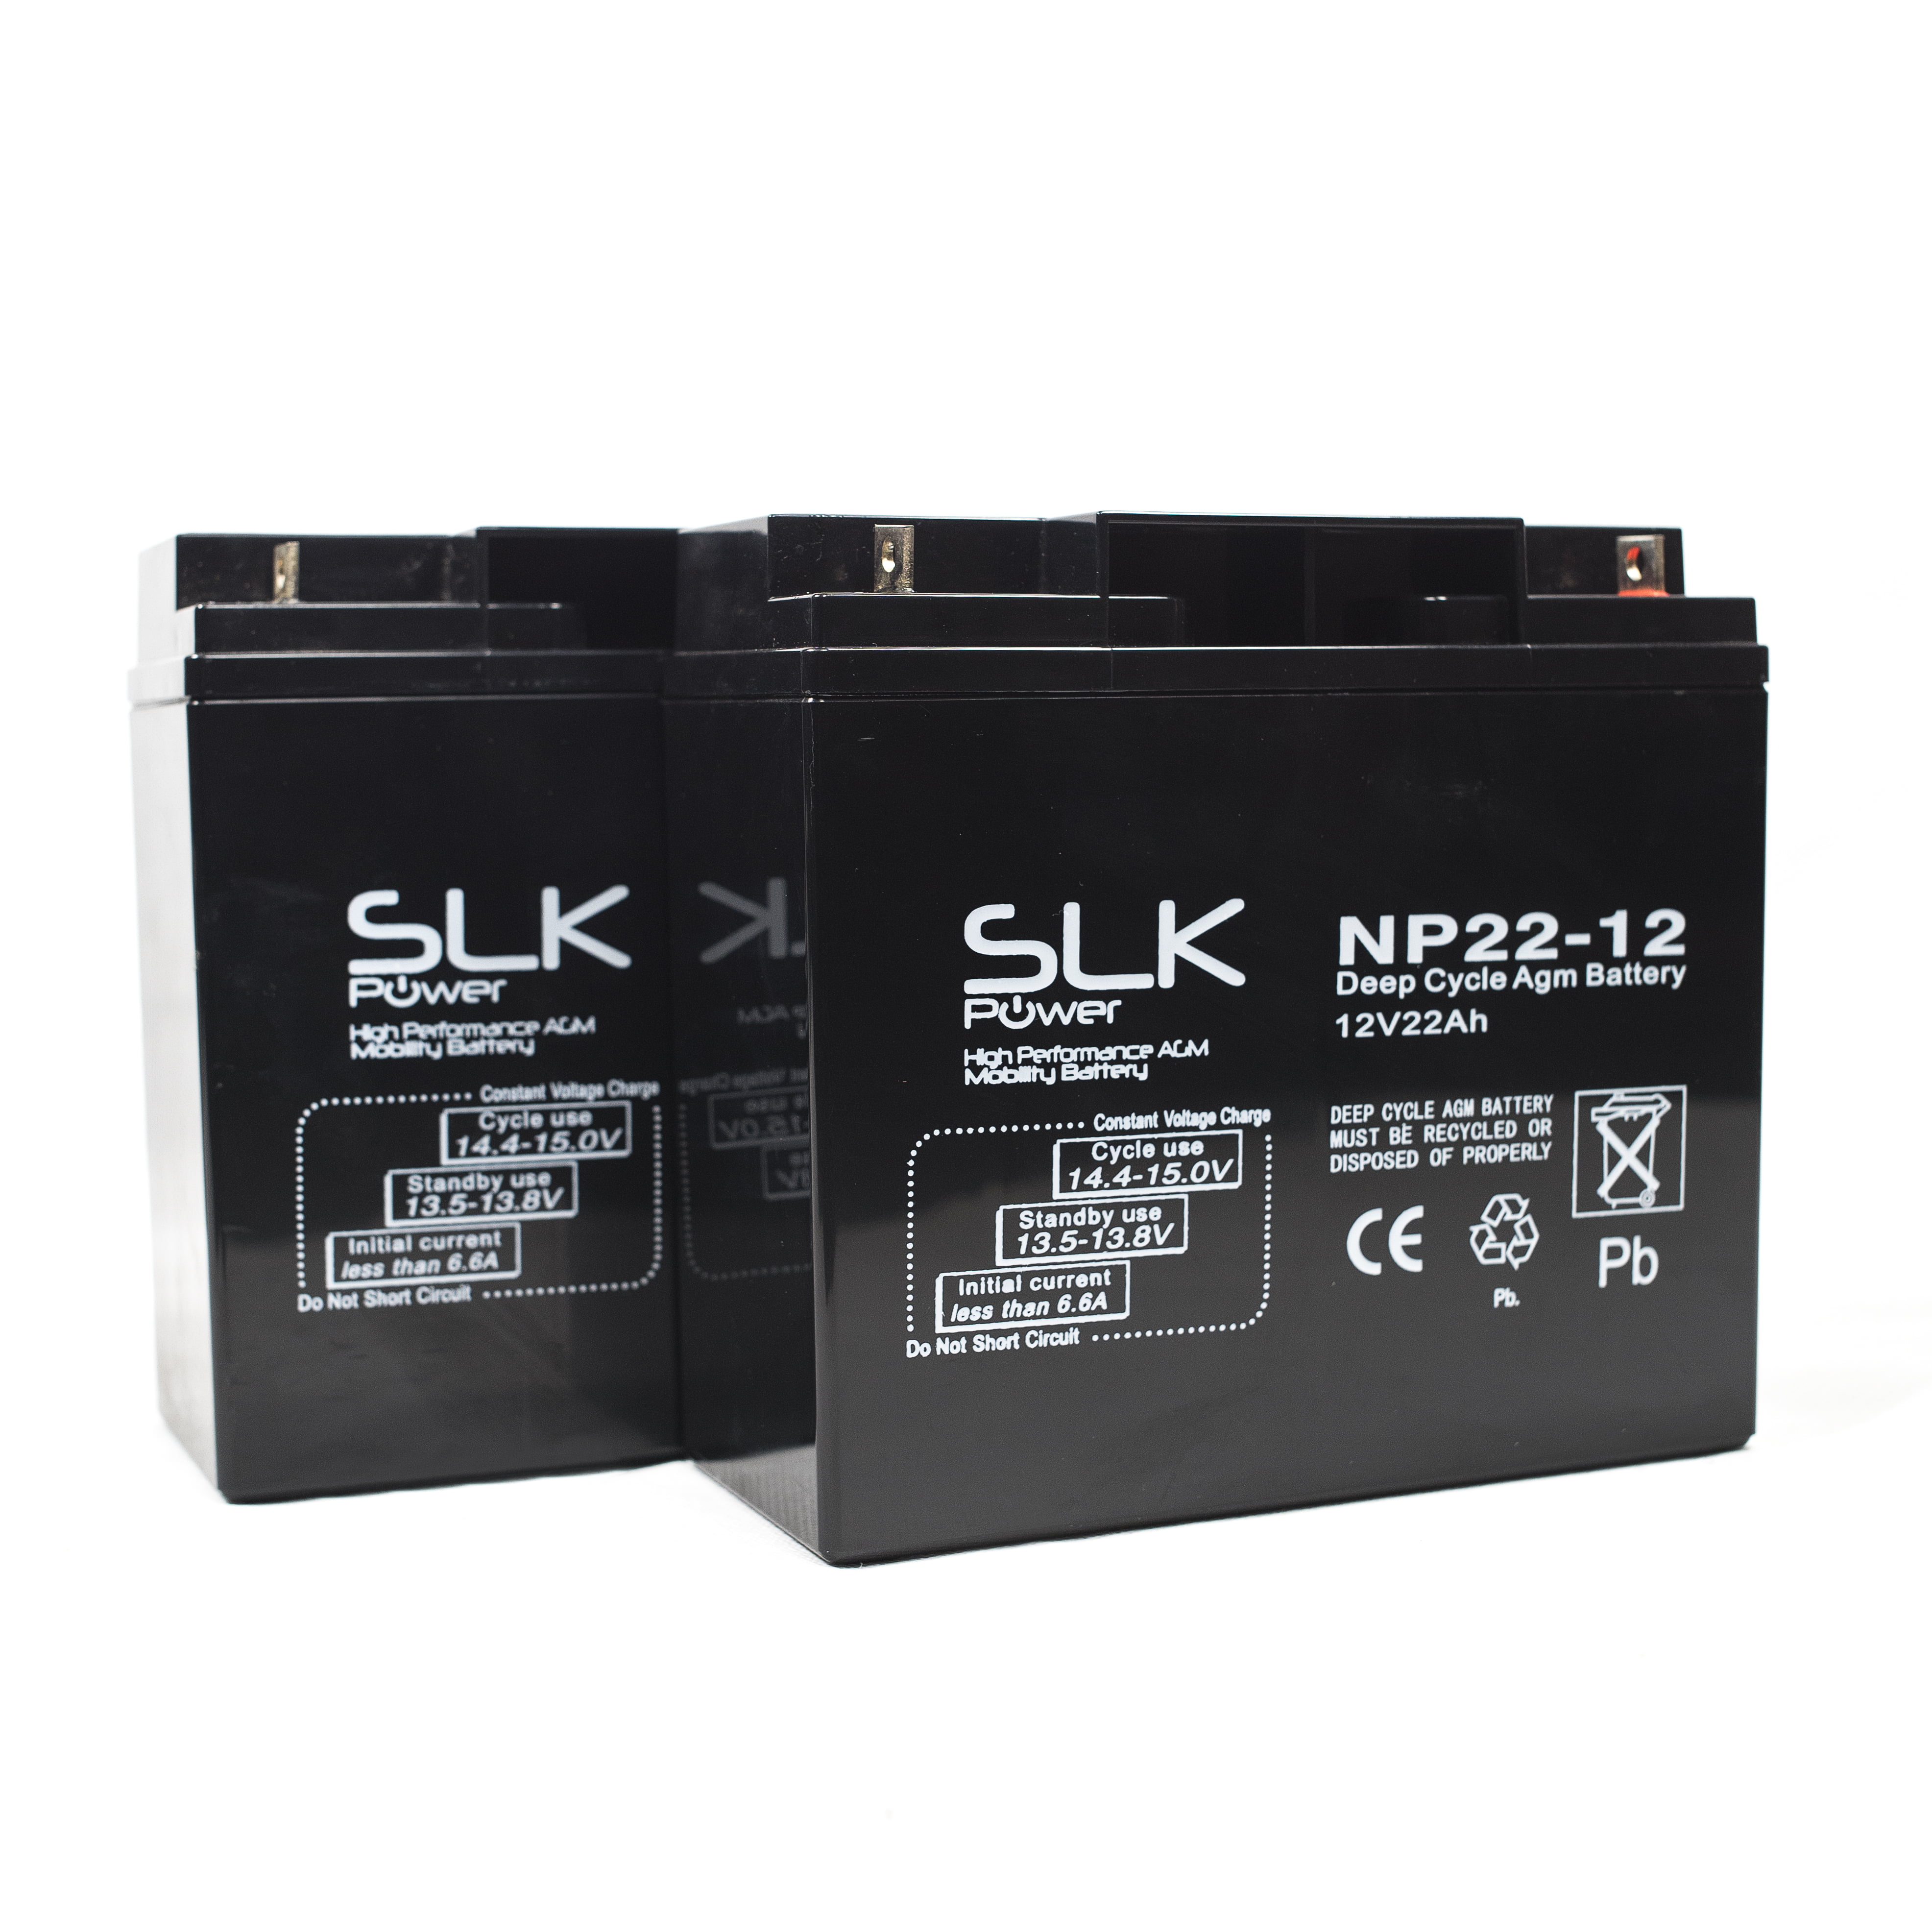 2 x 12v 22ah Mobility Scooter Batteries